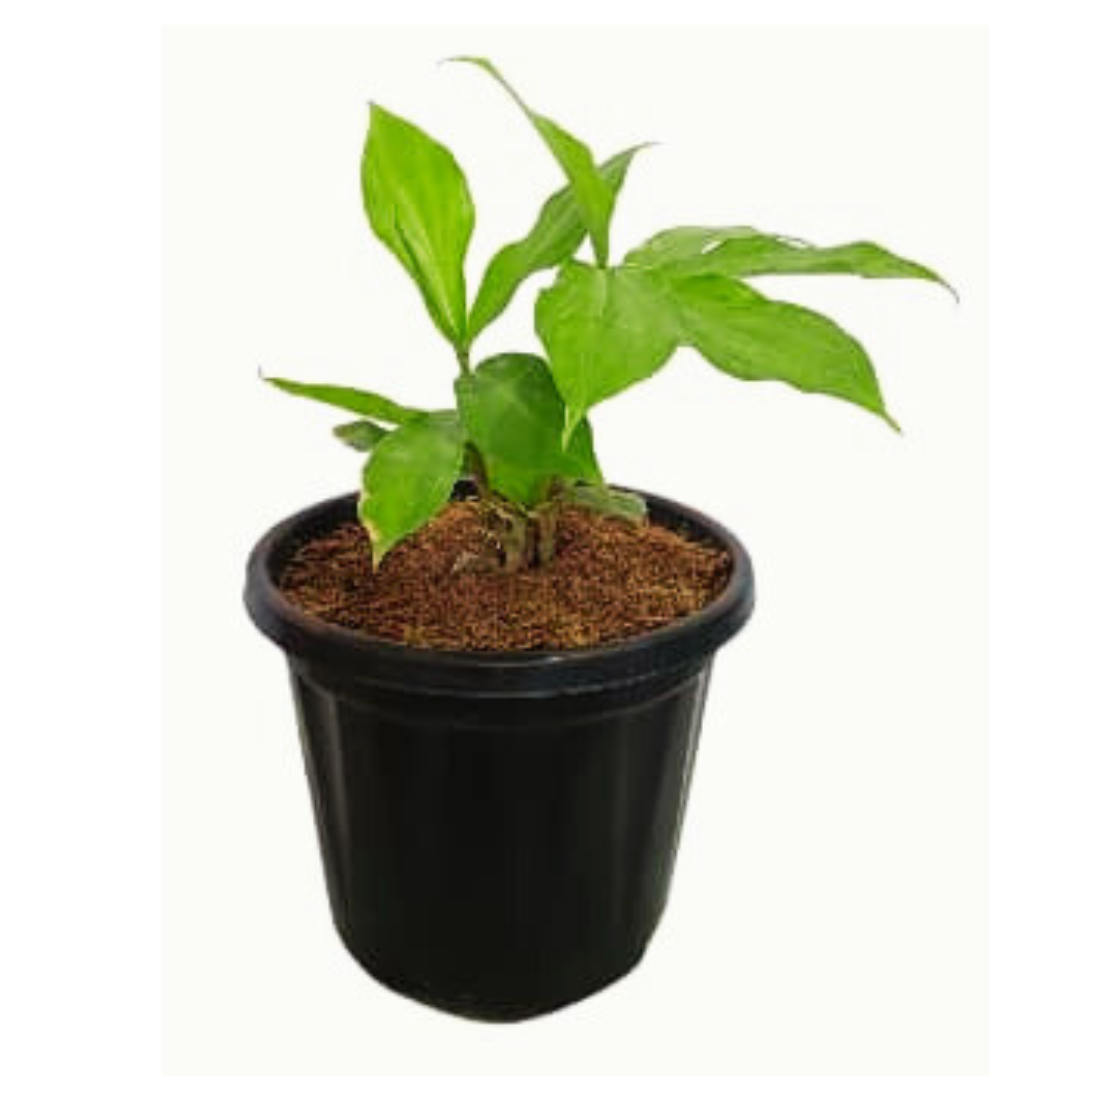 Purchase Insulin Plant Online: Medicinal Herb Acquisition, Buy Insulin Plant: Online Health-Focused Transaction, Shop for Insulin Plant: Internet-based Medicinal Herb Purchase, Acquire Insulin Plant Online: Health-conscious Buying Option